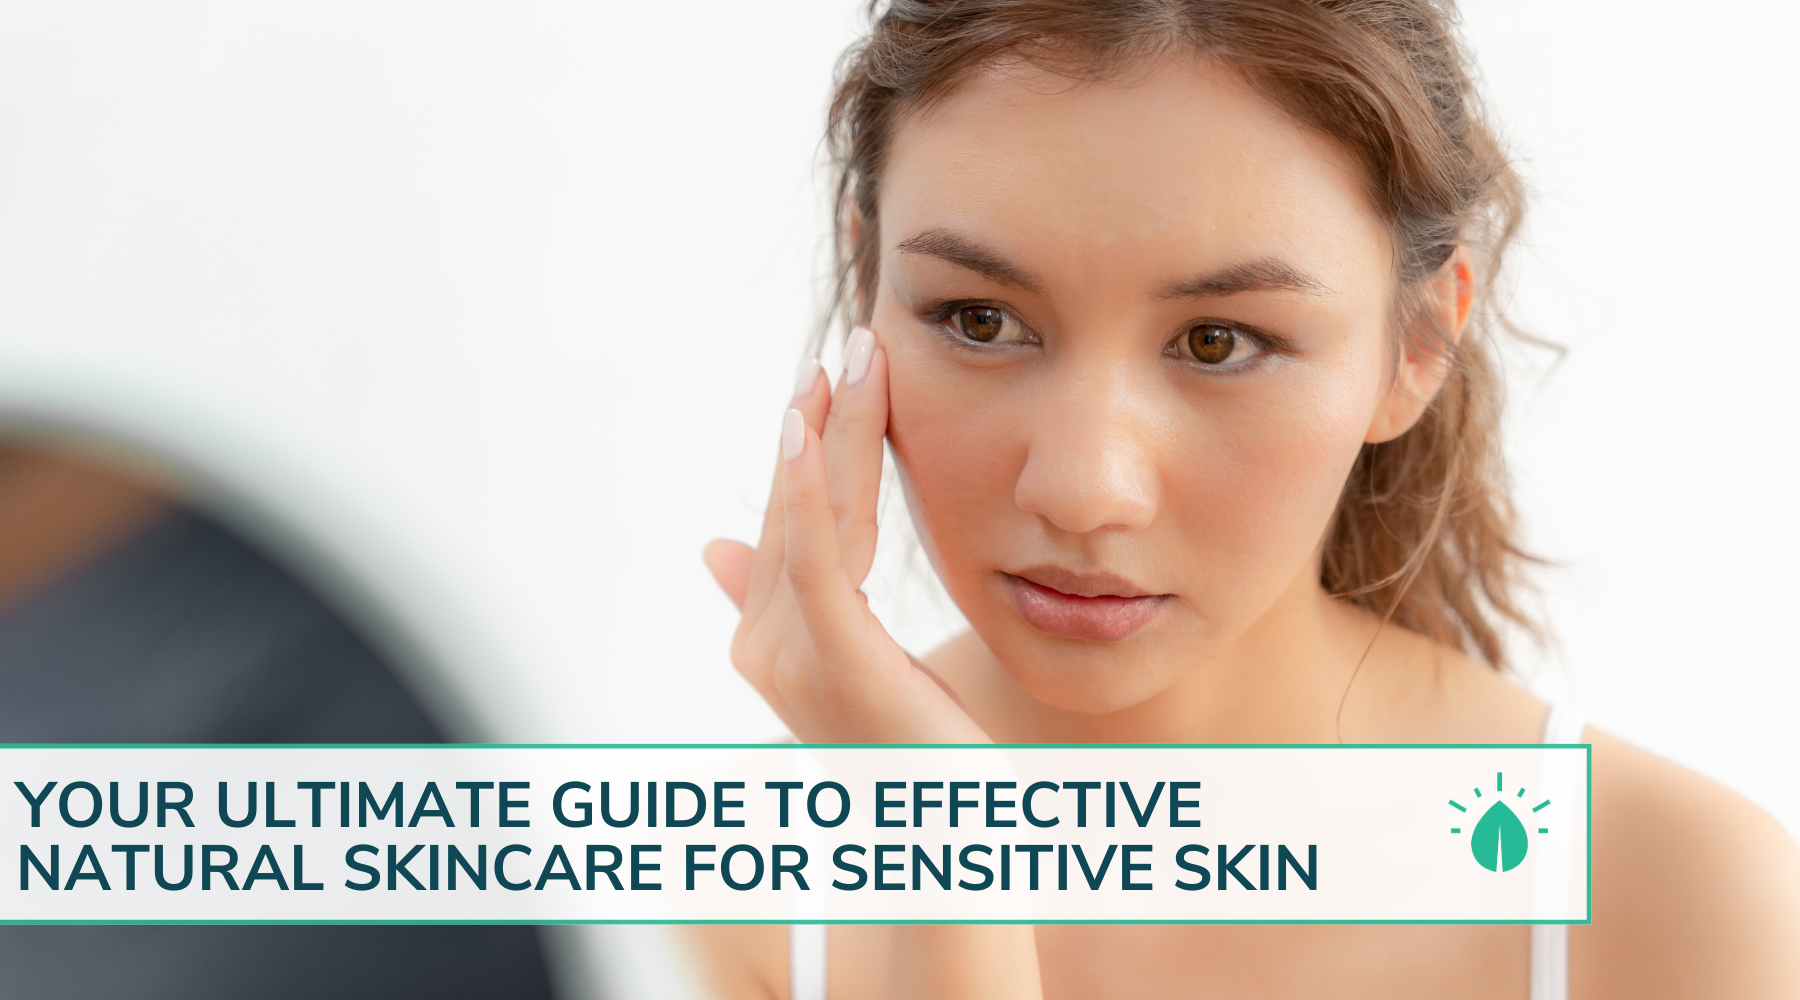 Your Ultimate Guide to Effective Natural Skincare for Sensitive Skin